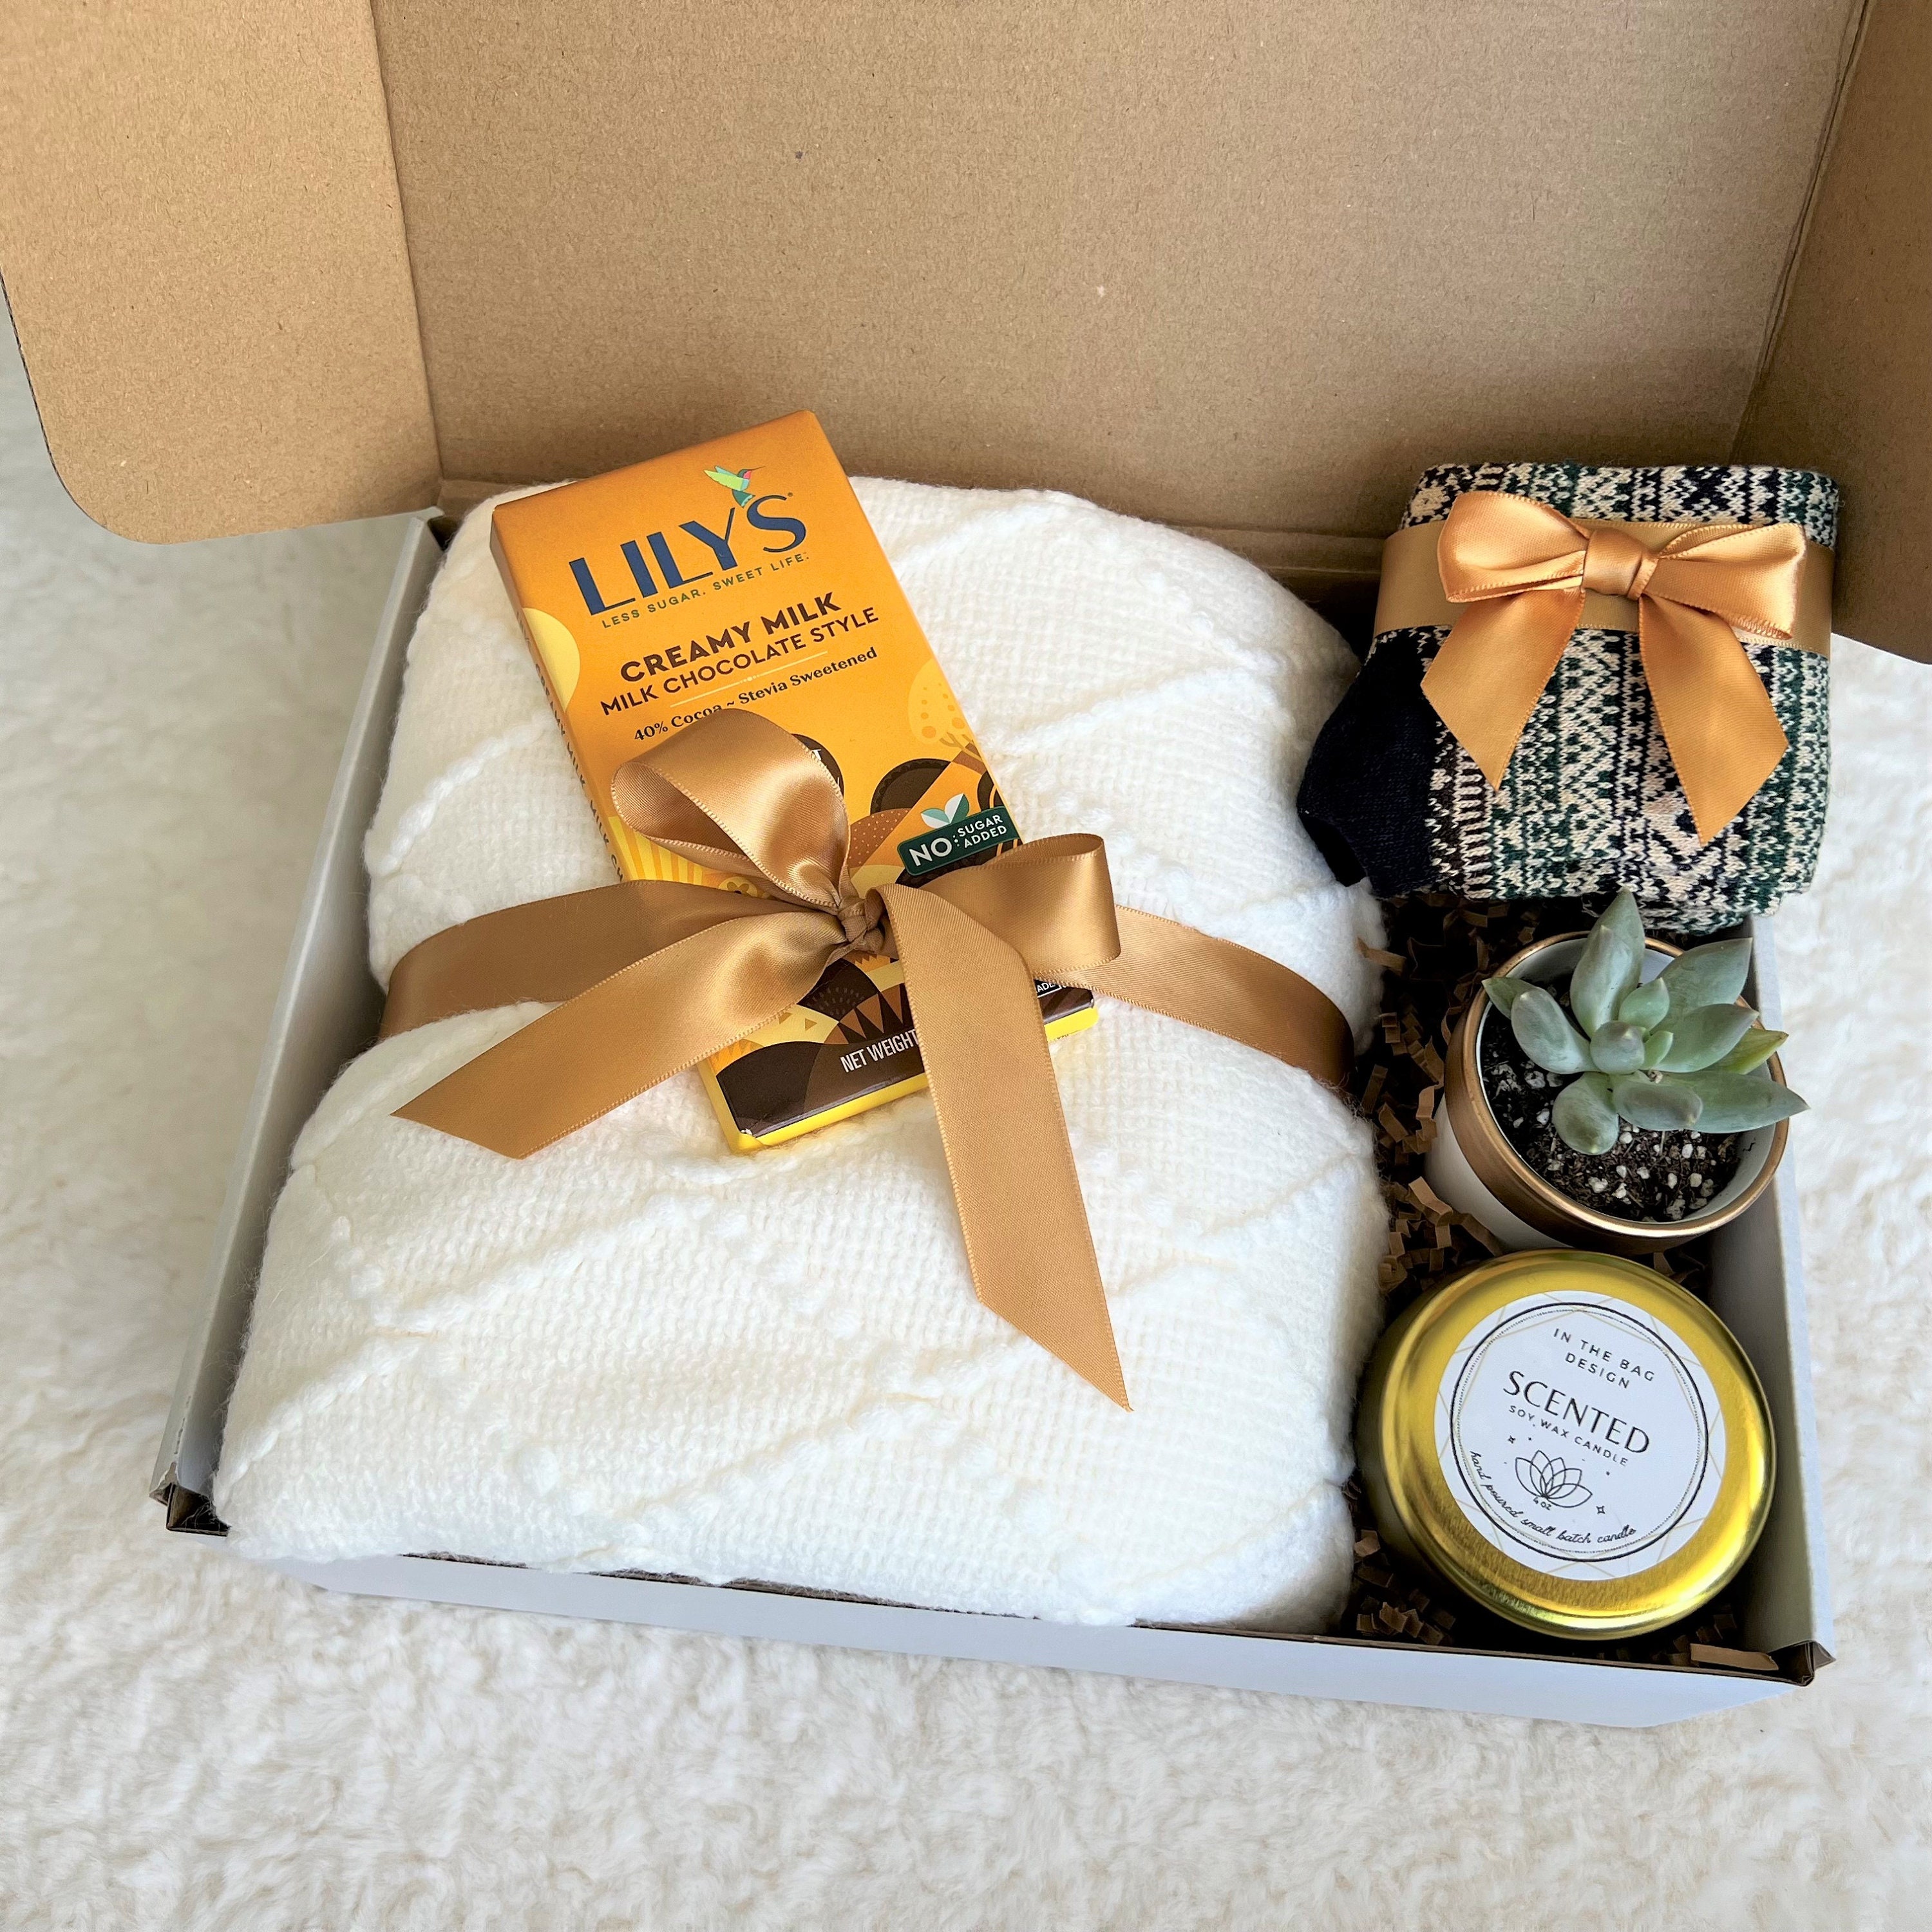 Suhctuptx Get Well Soon Gifts for Men, Care Package for Men Get Well Gift  Basket with Inspirational Blanket Socks Comfort Items for After Surgery